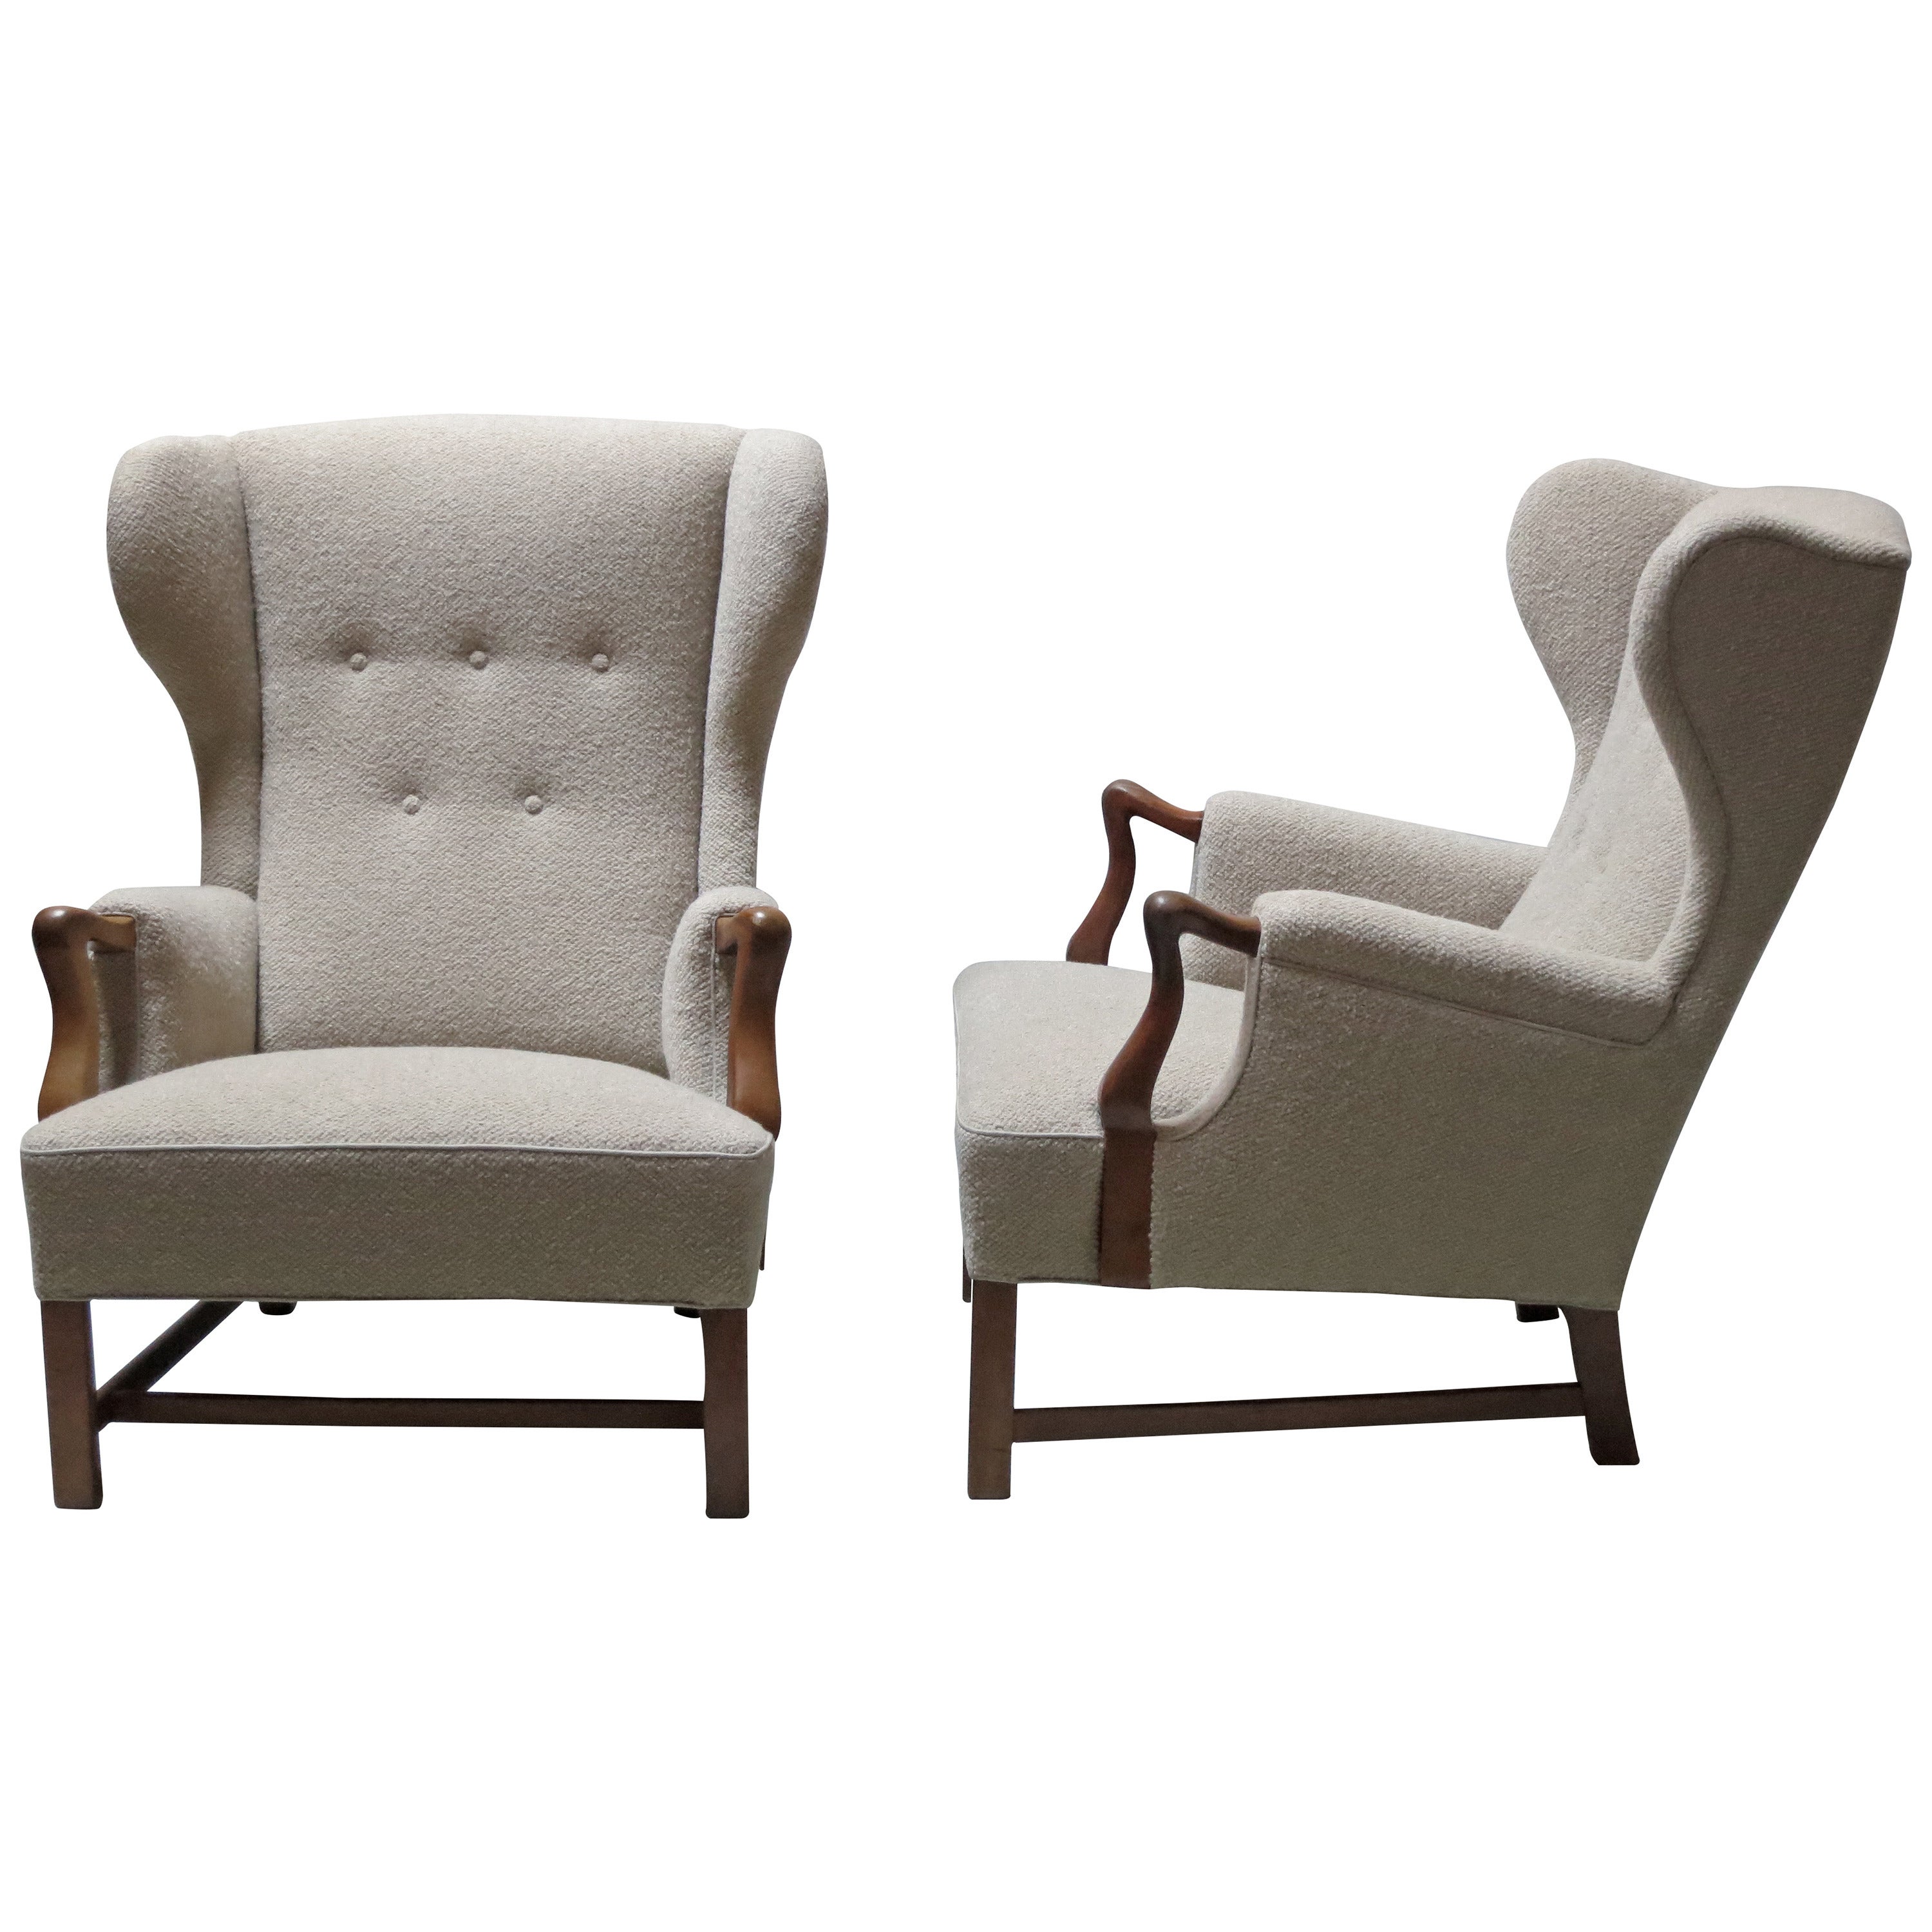 Pair of 1940s Wingback Chairs by Jacob Kjaer